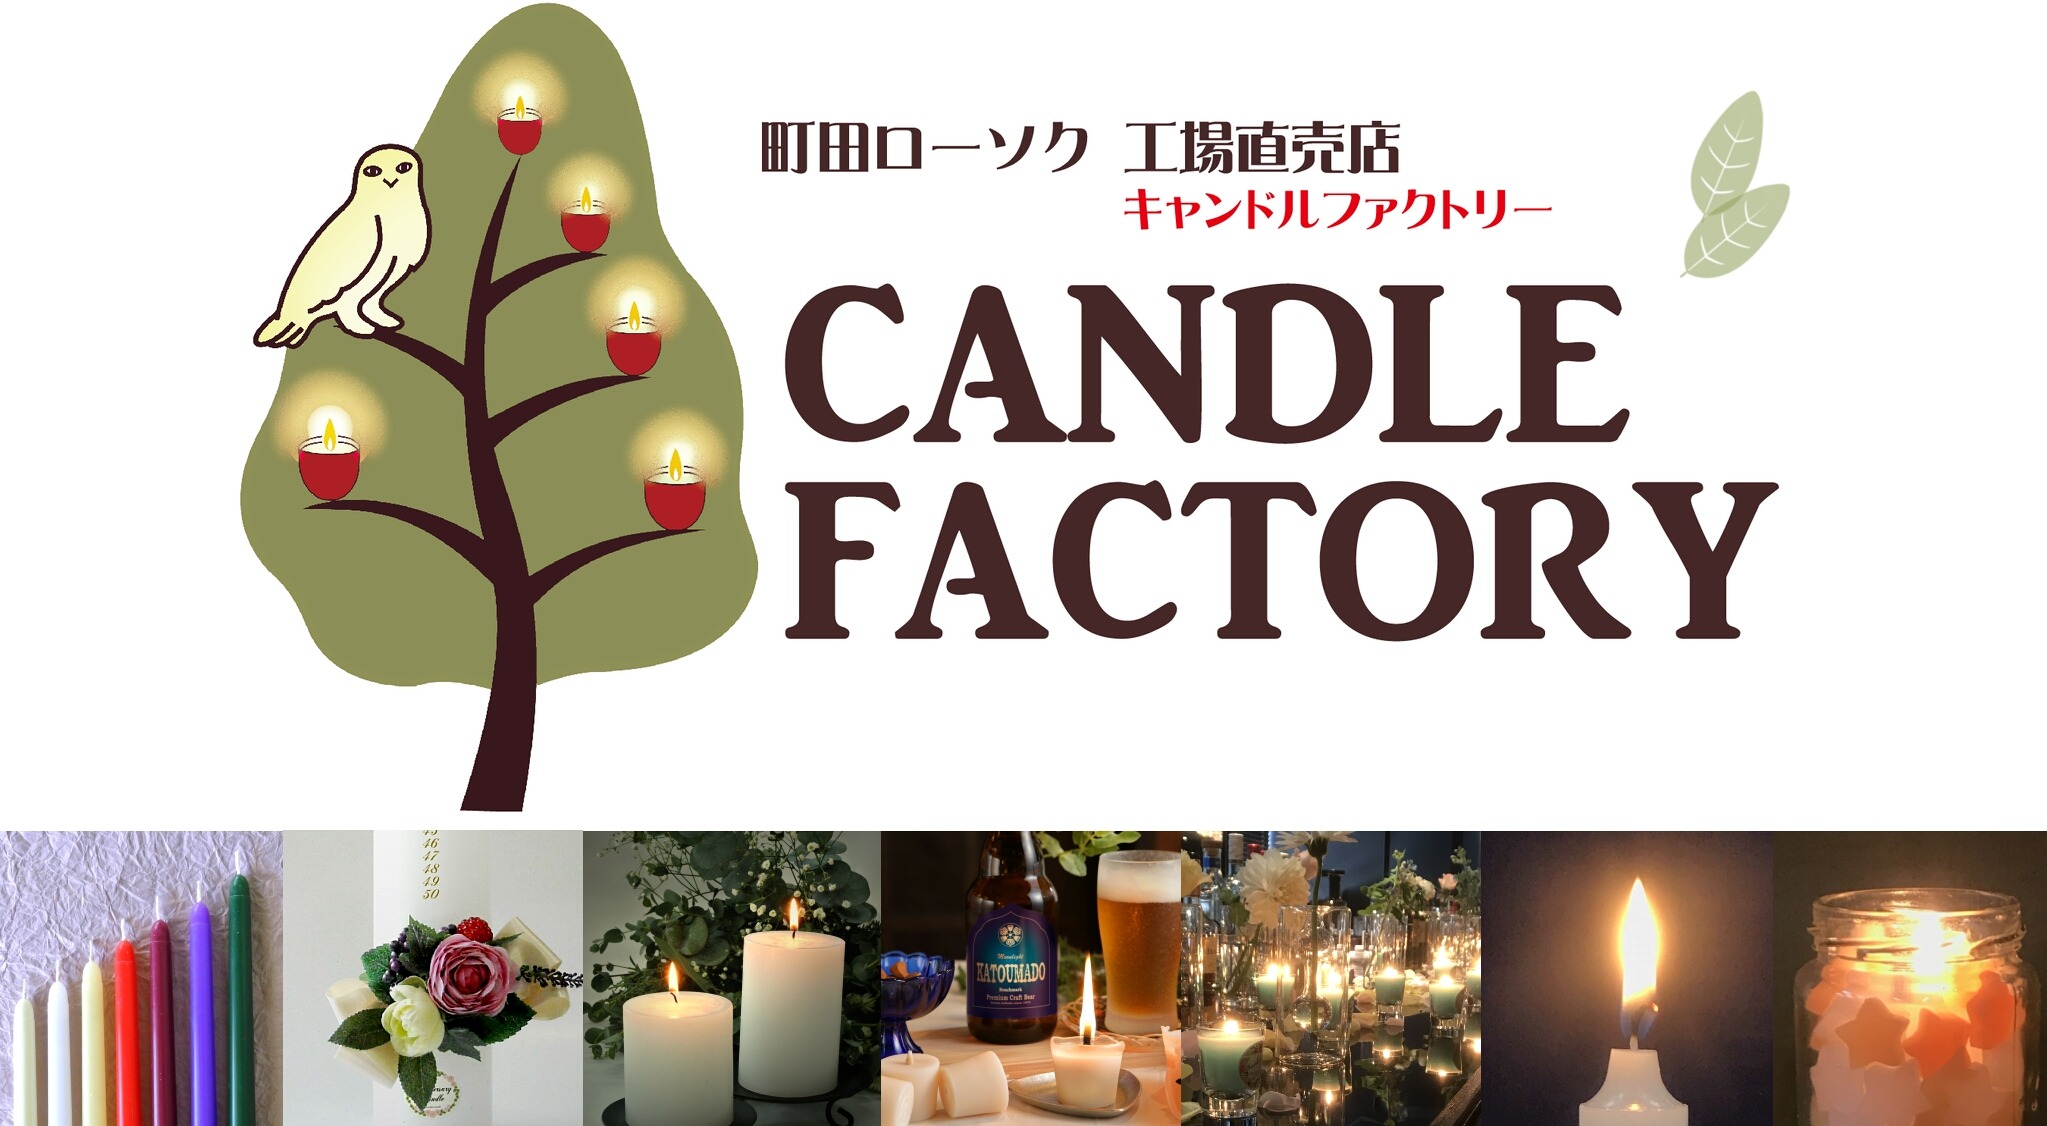 CANDLE FACTORY